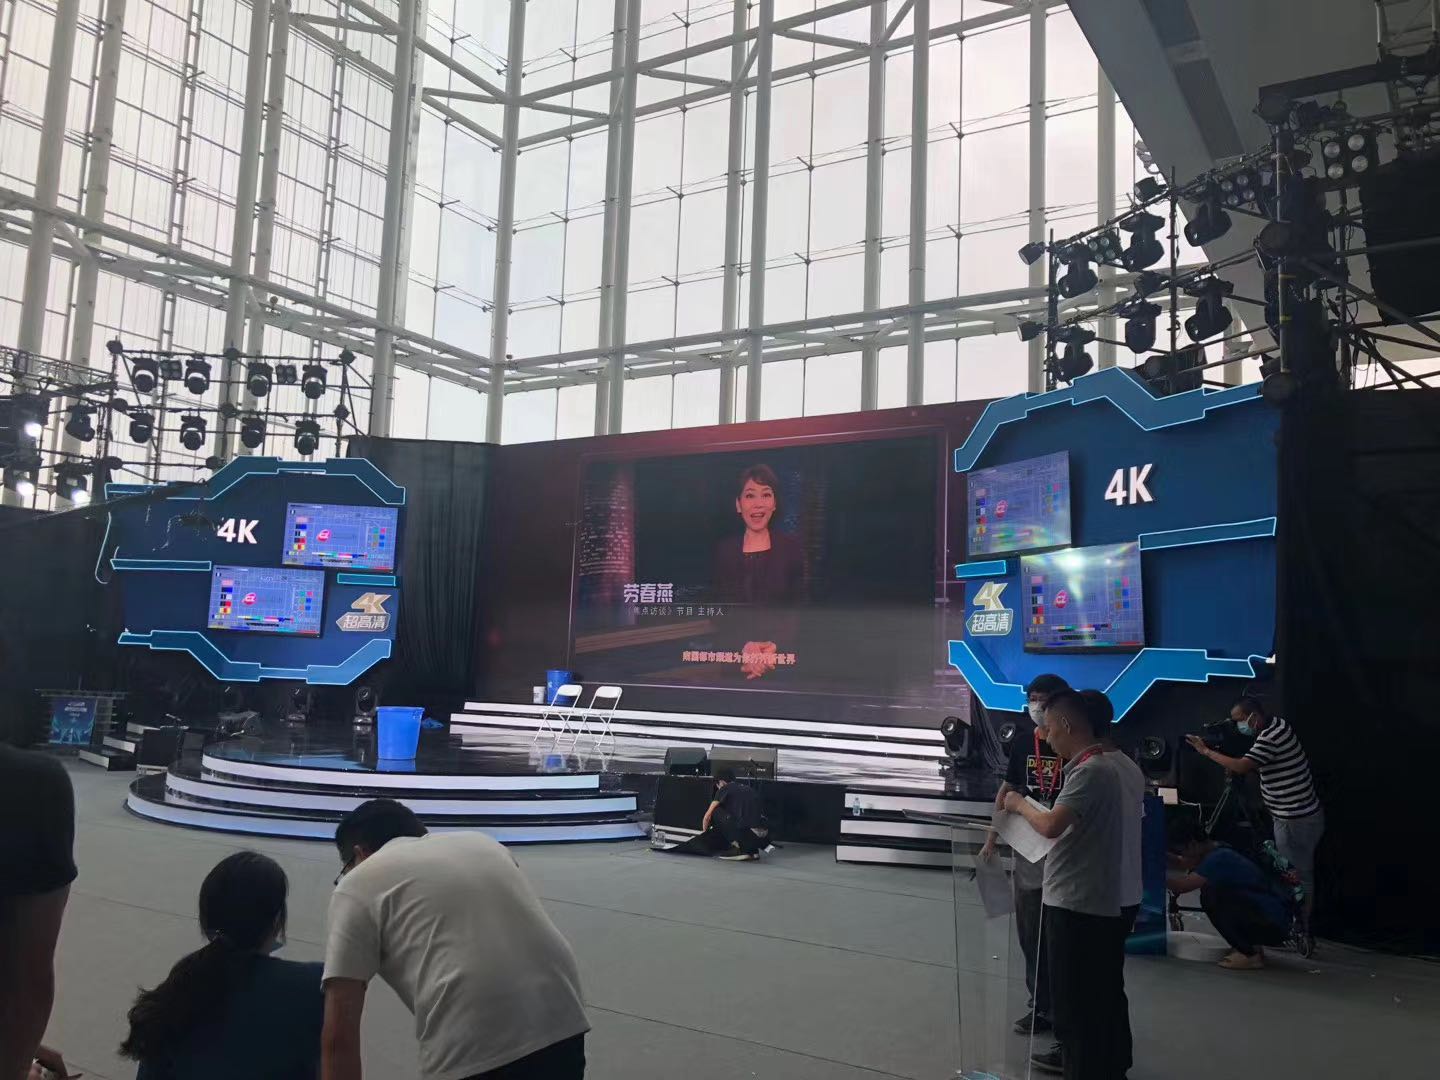 4K Channel Opening Ceremony of Guangzhou TV station